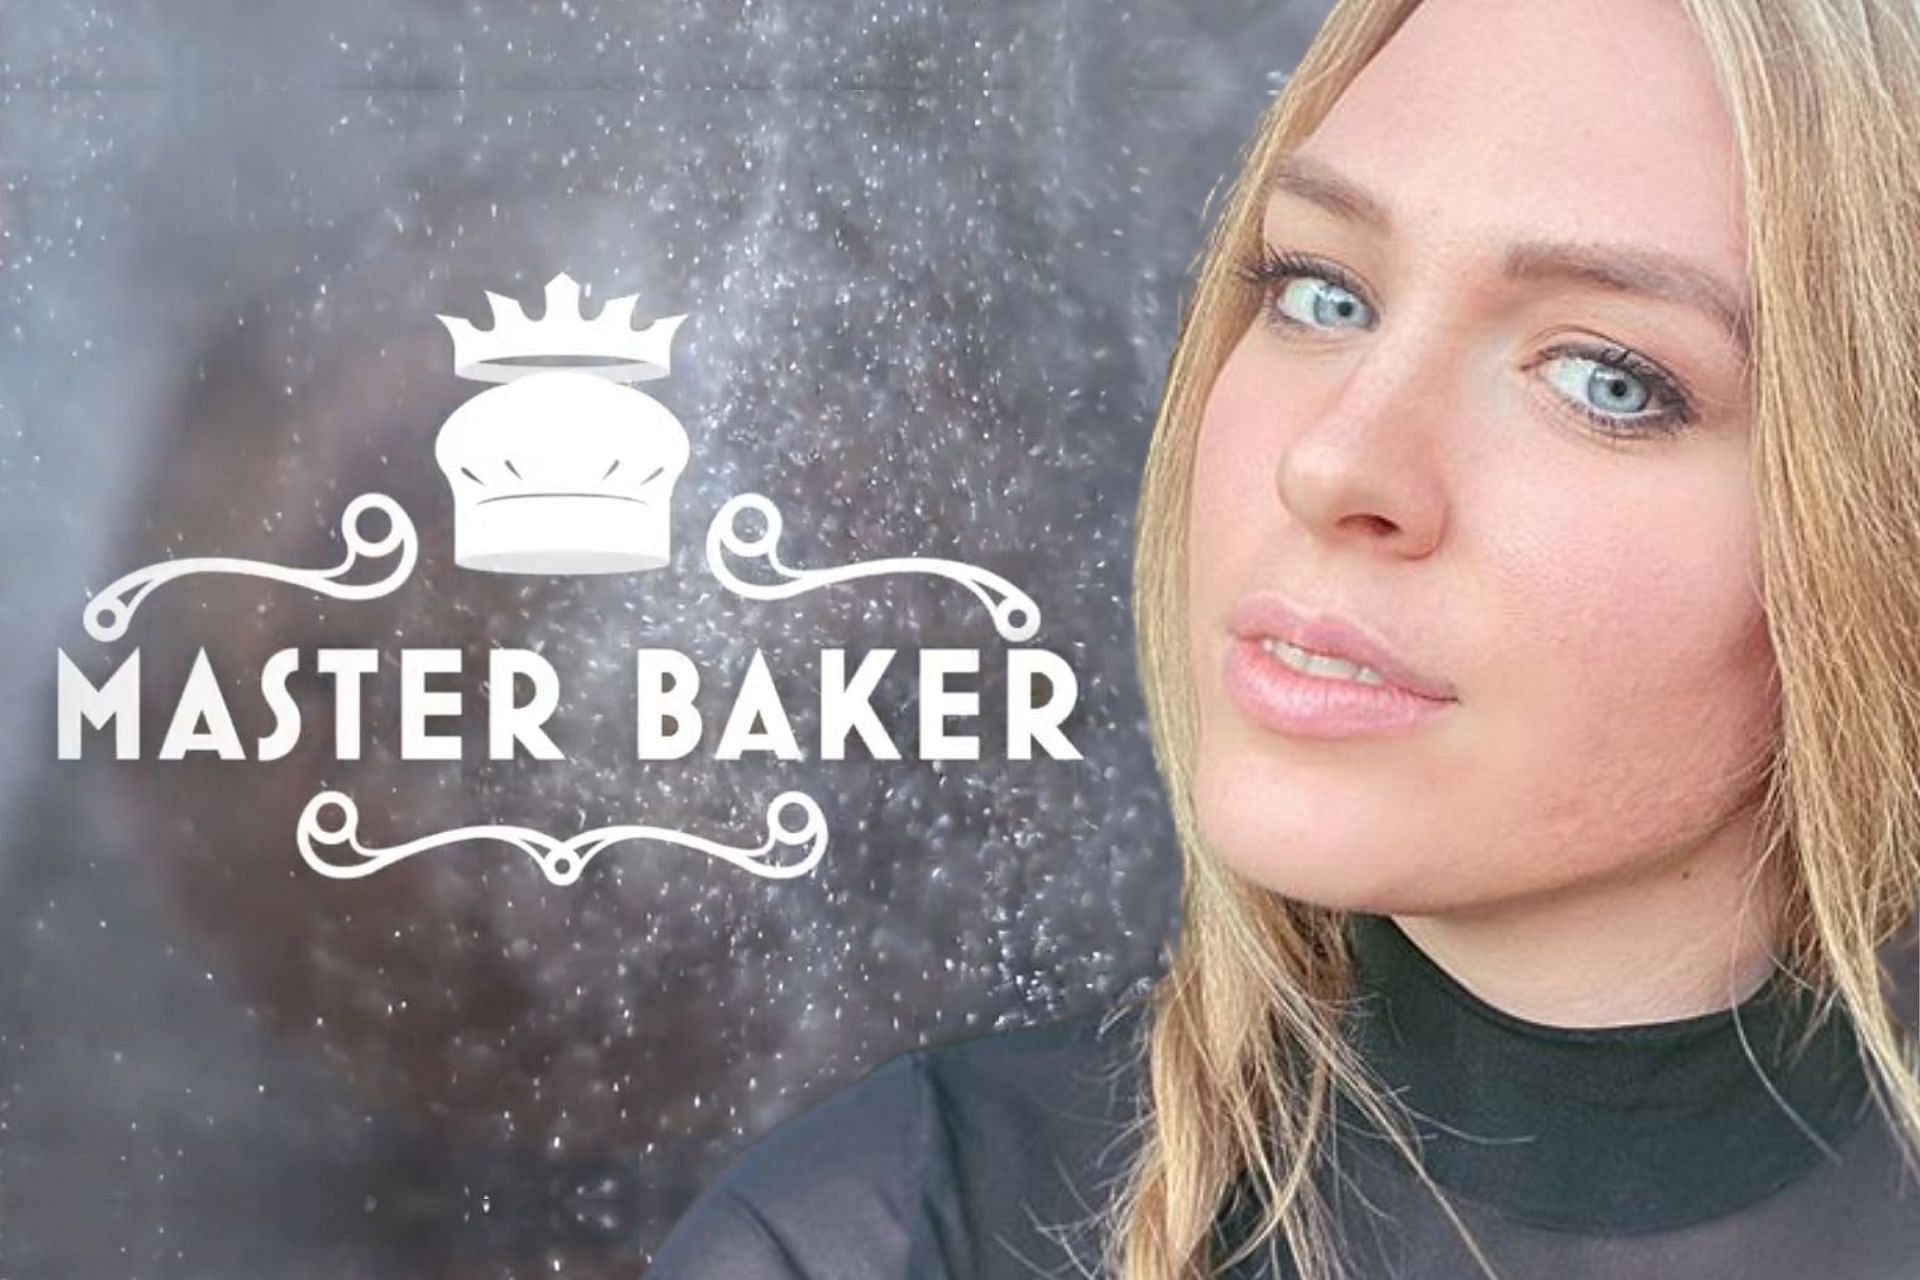 Master Baker show by QTCinderella — thousands of viewers and hype